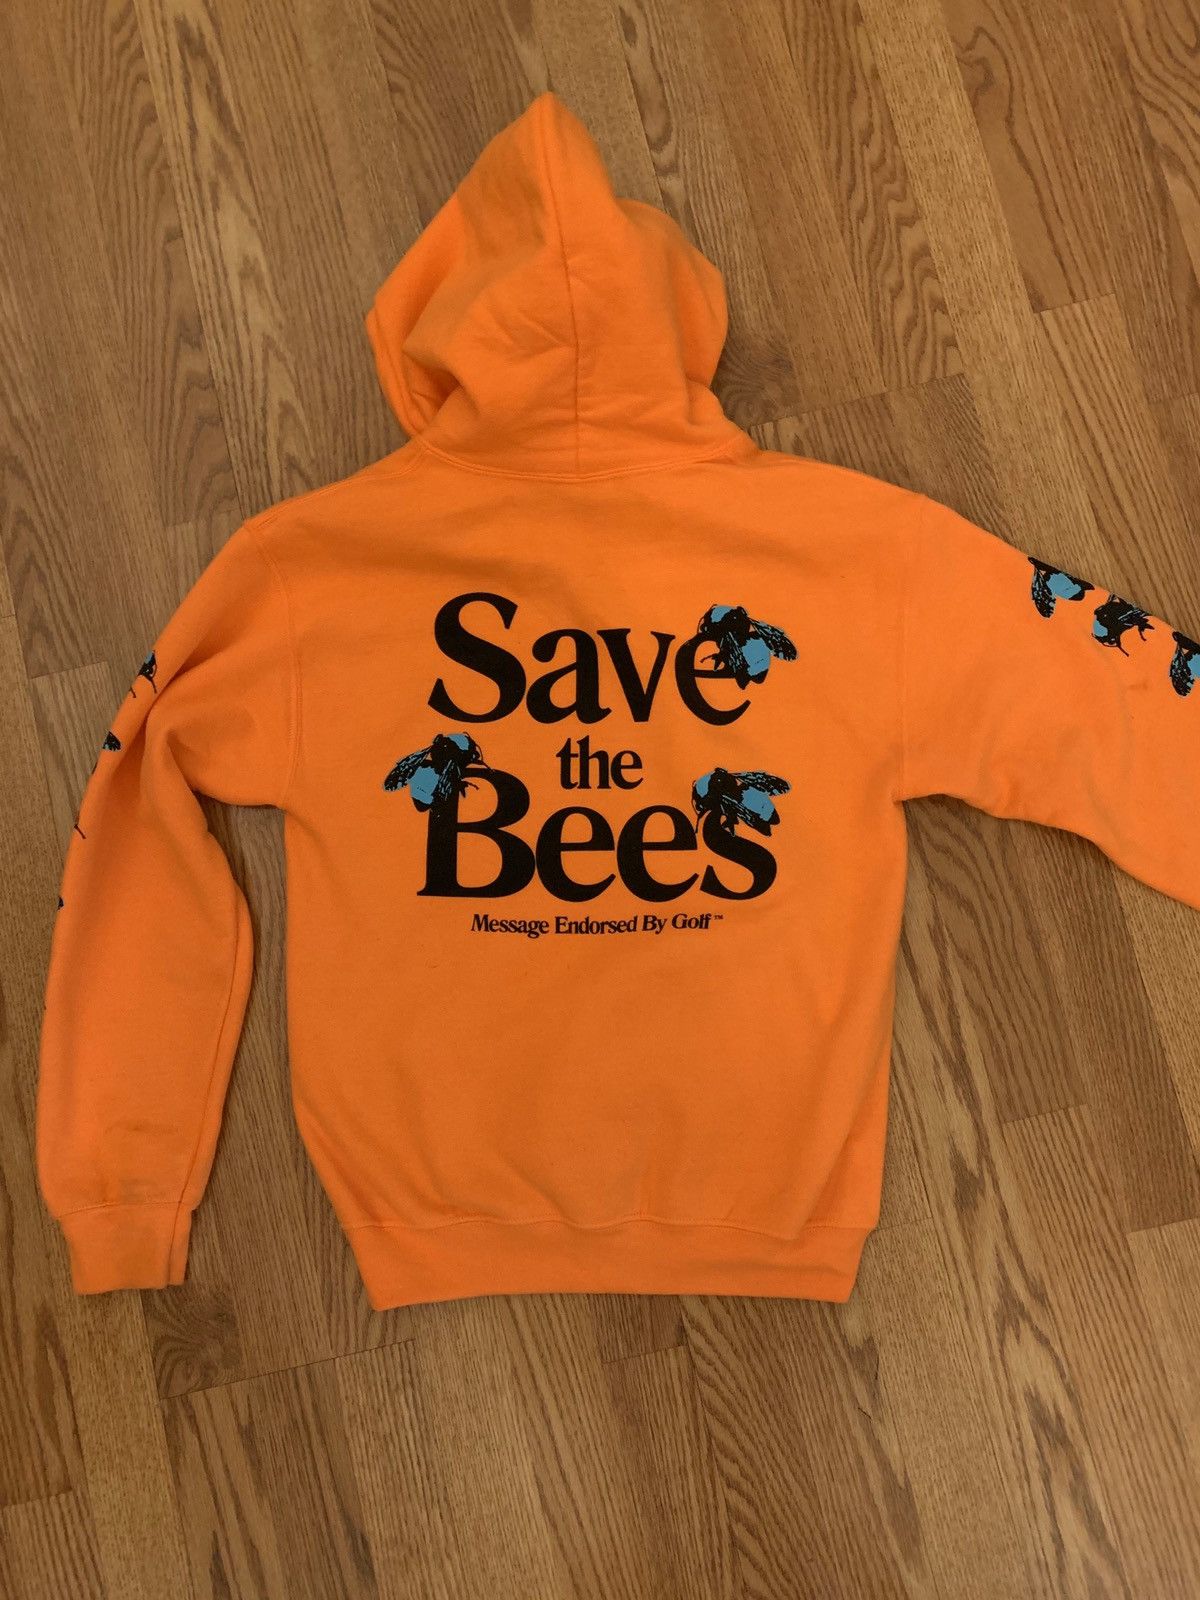 Golf Wang FlowerBoy Save the Bees Hoodie Size US S / EU 44-46 / 1 - 2 Preview